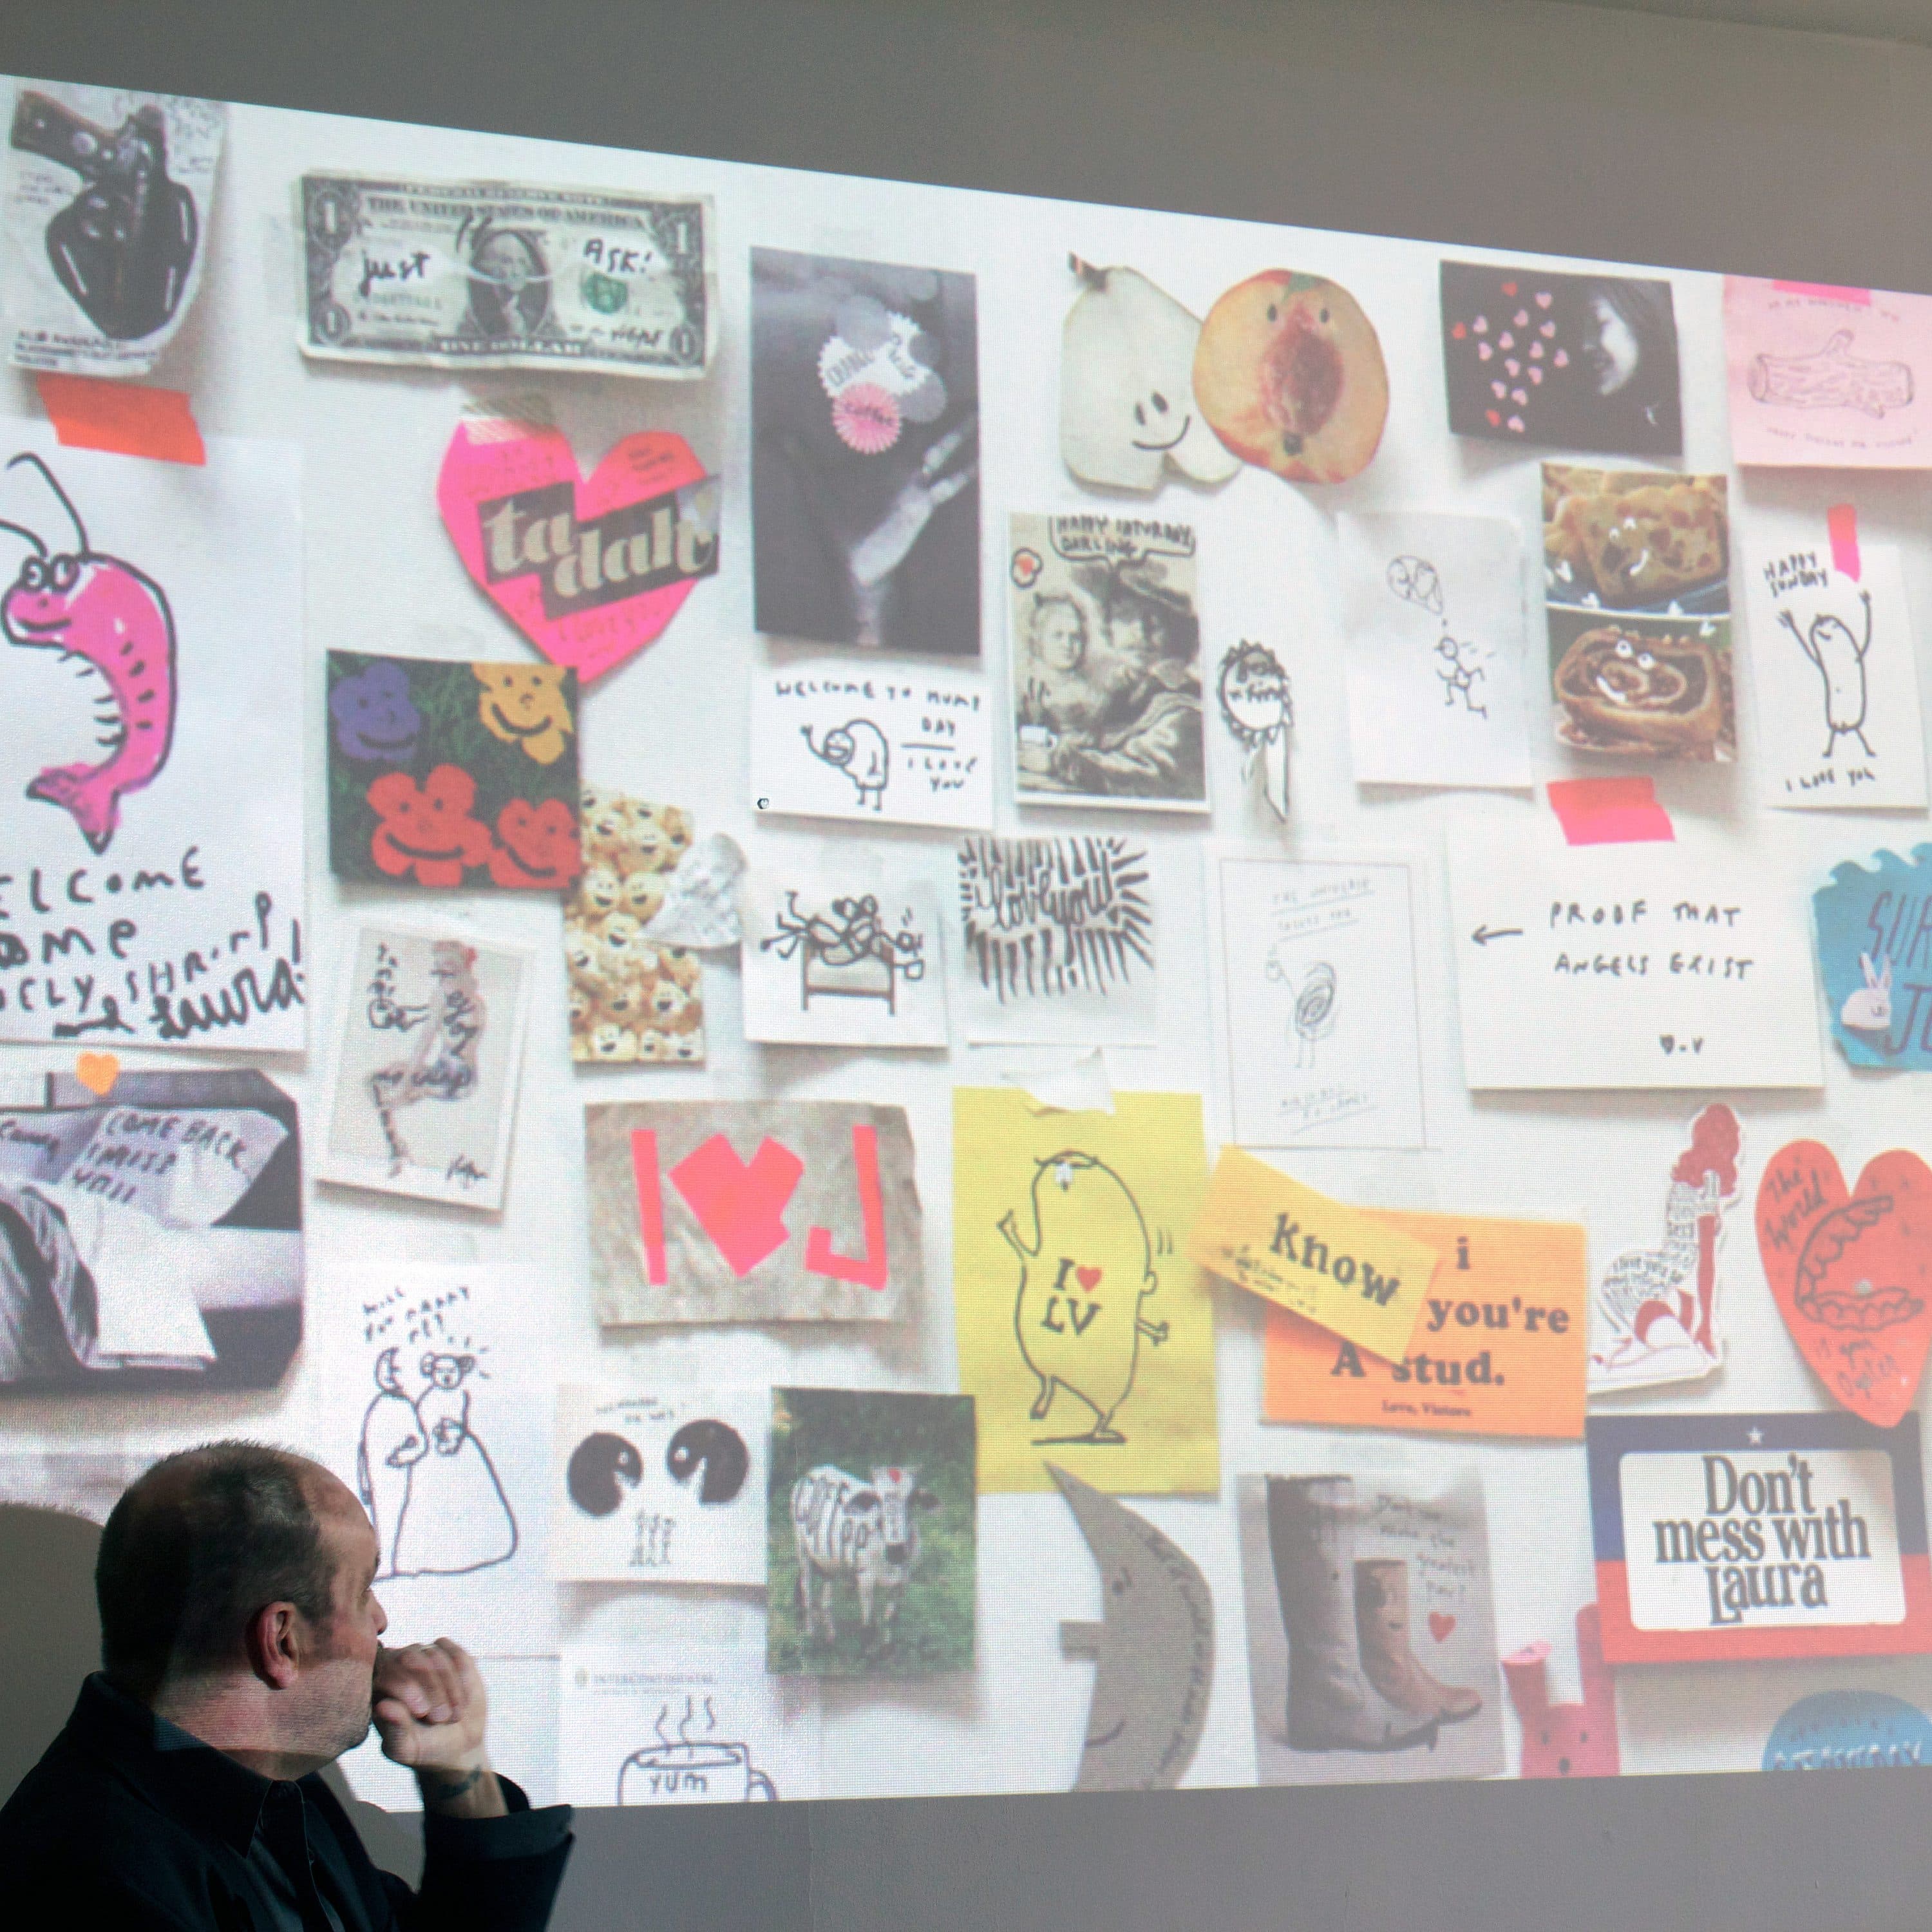 A person is sitting and looking at a wall filled with various drawings, notes, and pictures. The collage includes doodles, heart shapes, messages, and other artistic elements. The person appears to be contemplating or analyzing the colorful display.